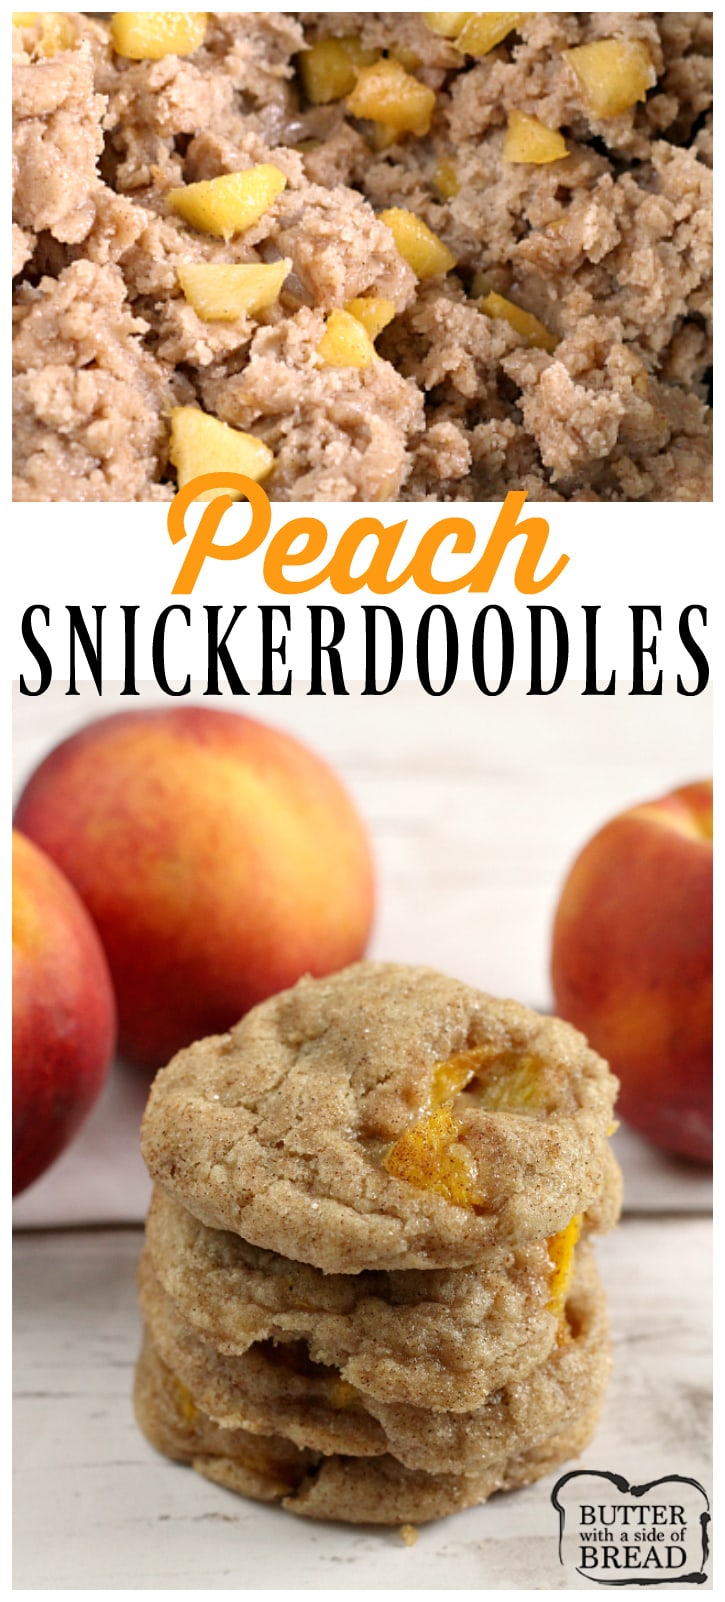 Peach Snickerdoodles are soft, chewy, delicious and the addition of fresh peaches takes your favorite cinnamon sugar cookie up a couple notches!